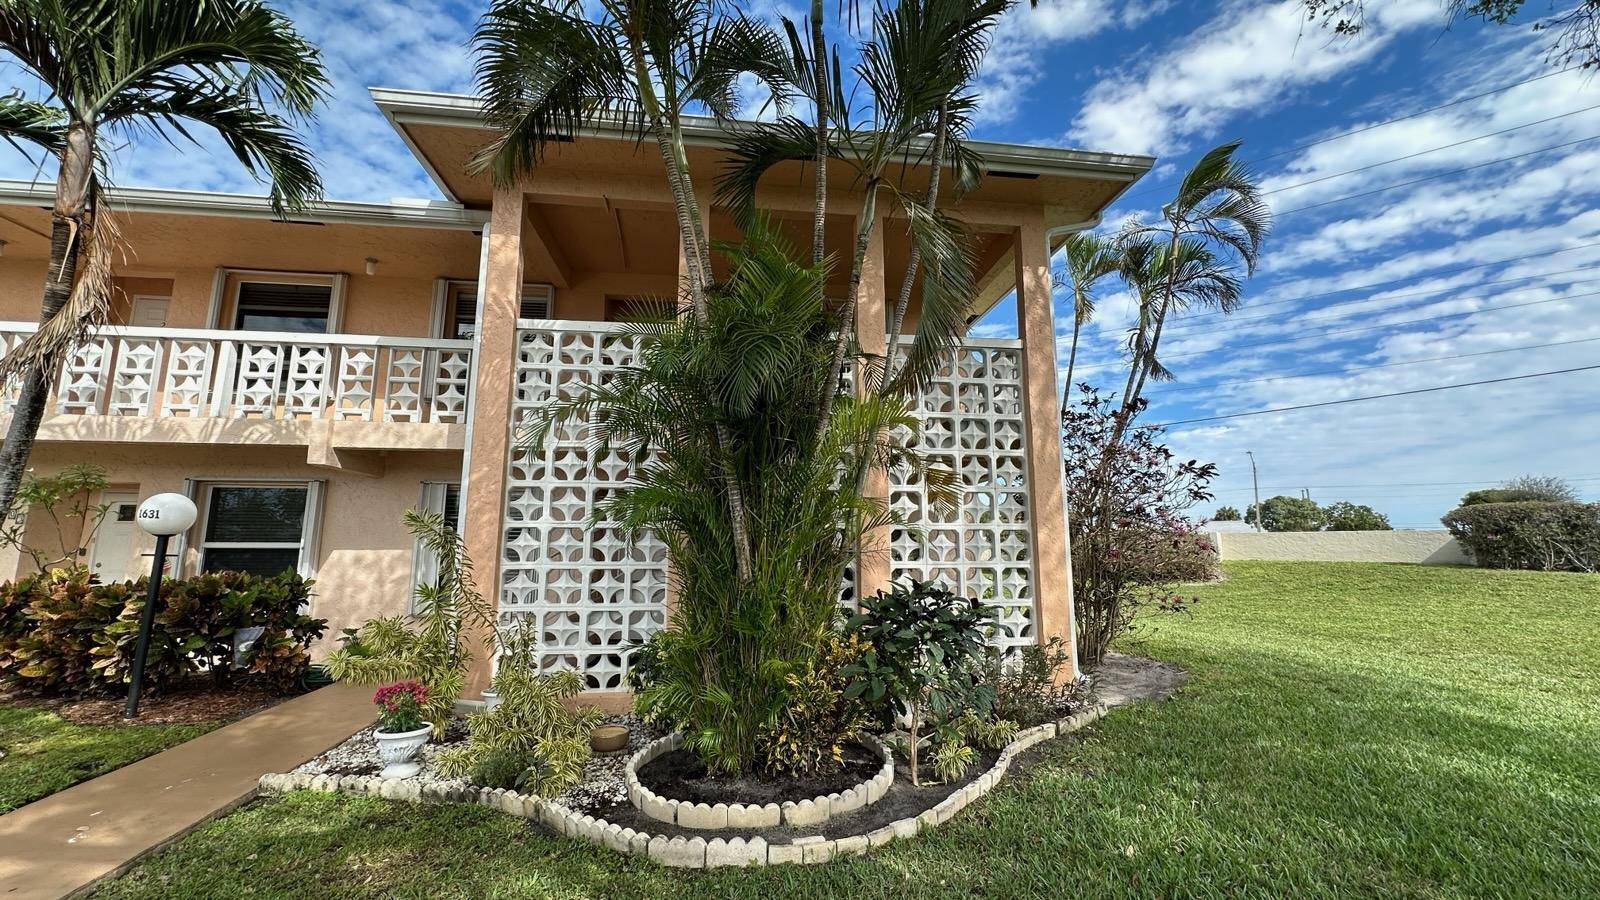 ''Welcome to Delray Beach living at its finest in this 55 community situated in the Pines north of Delray Beach !